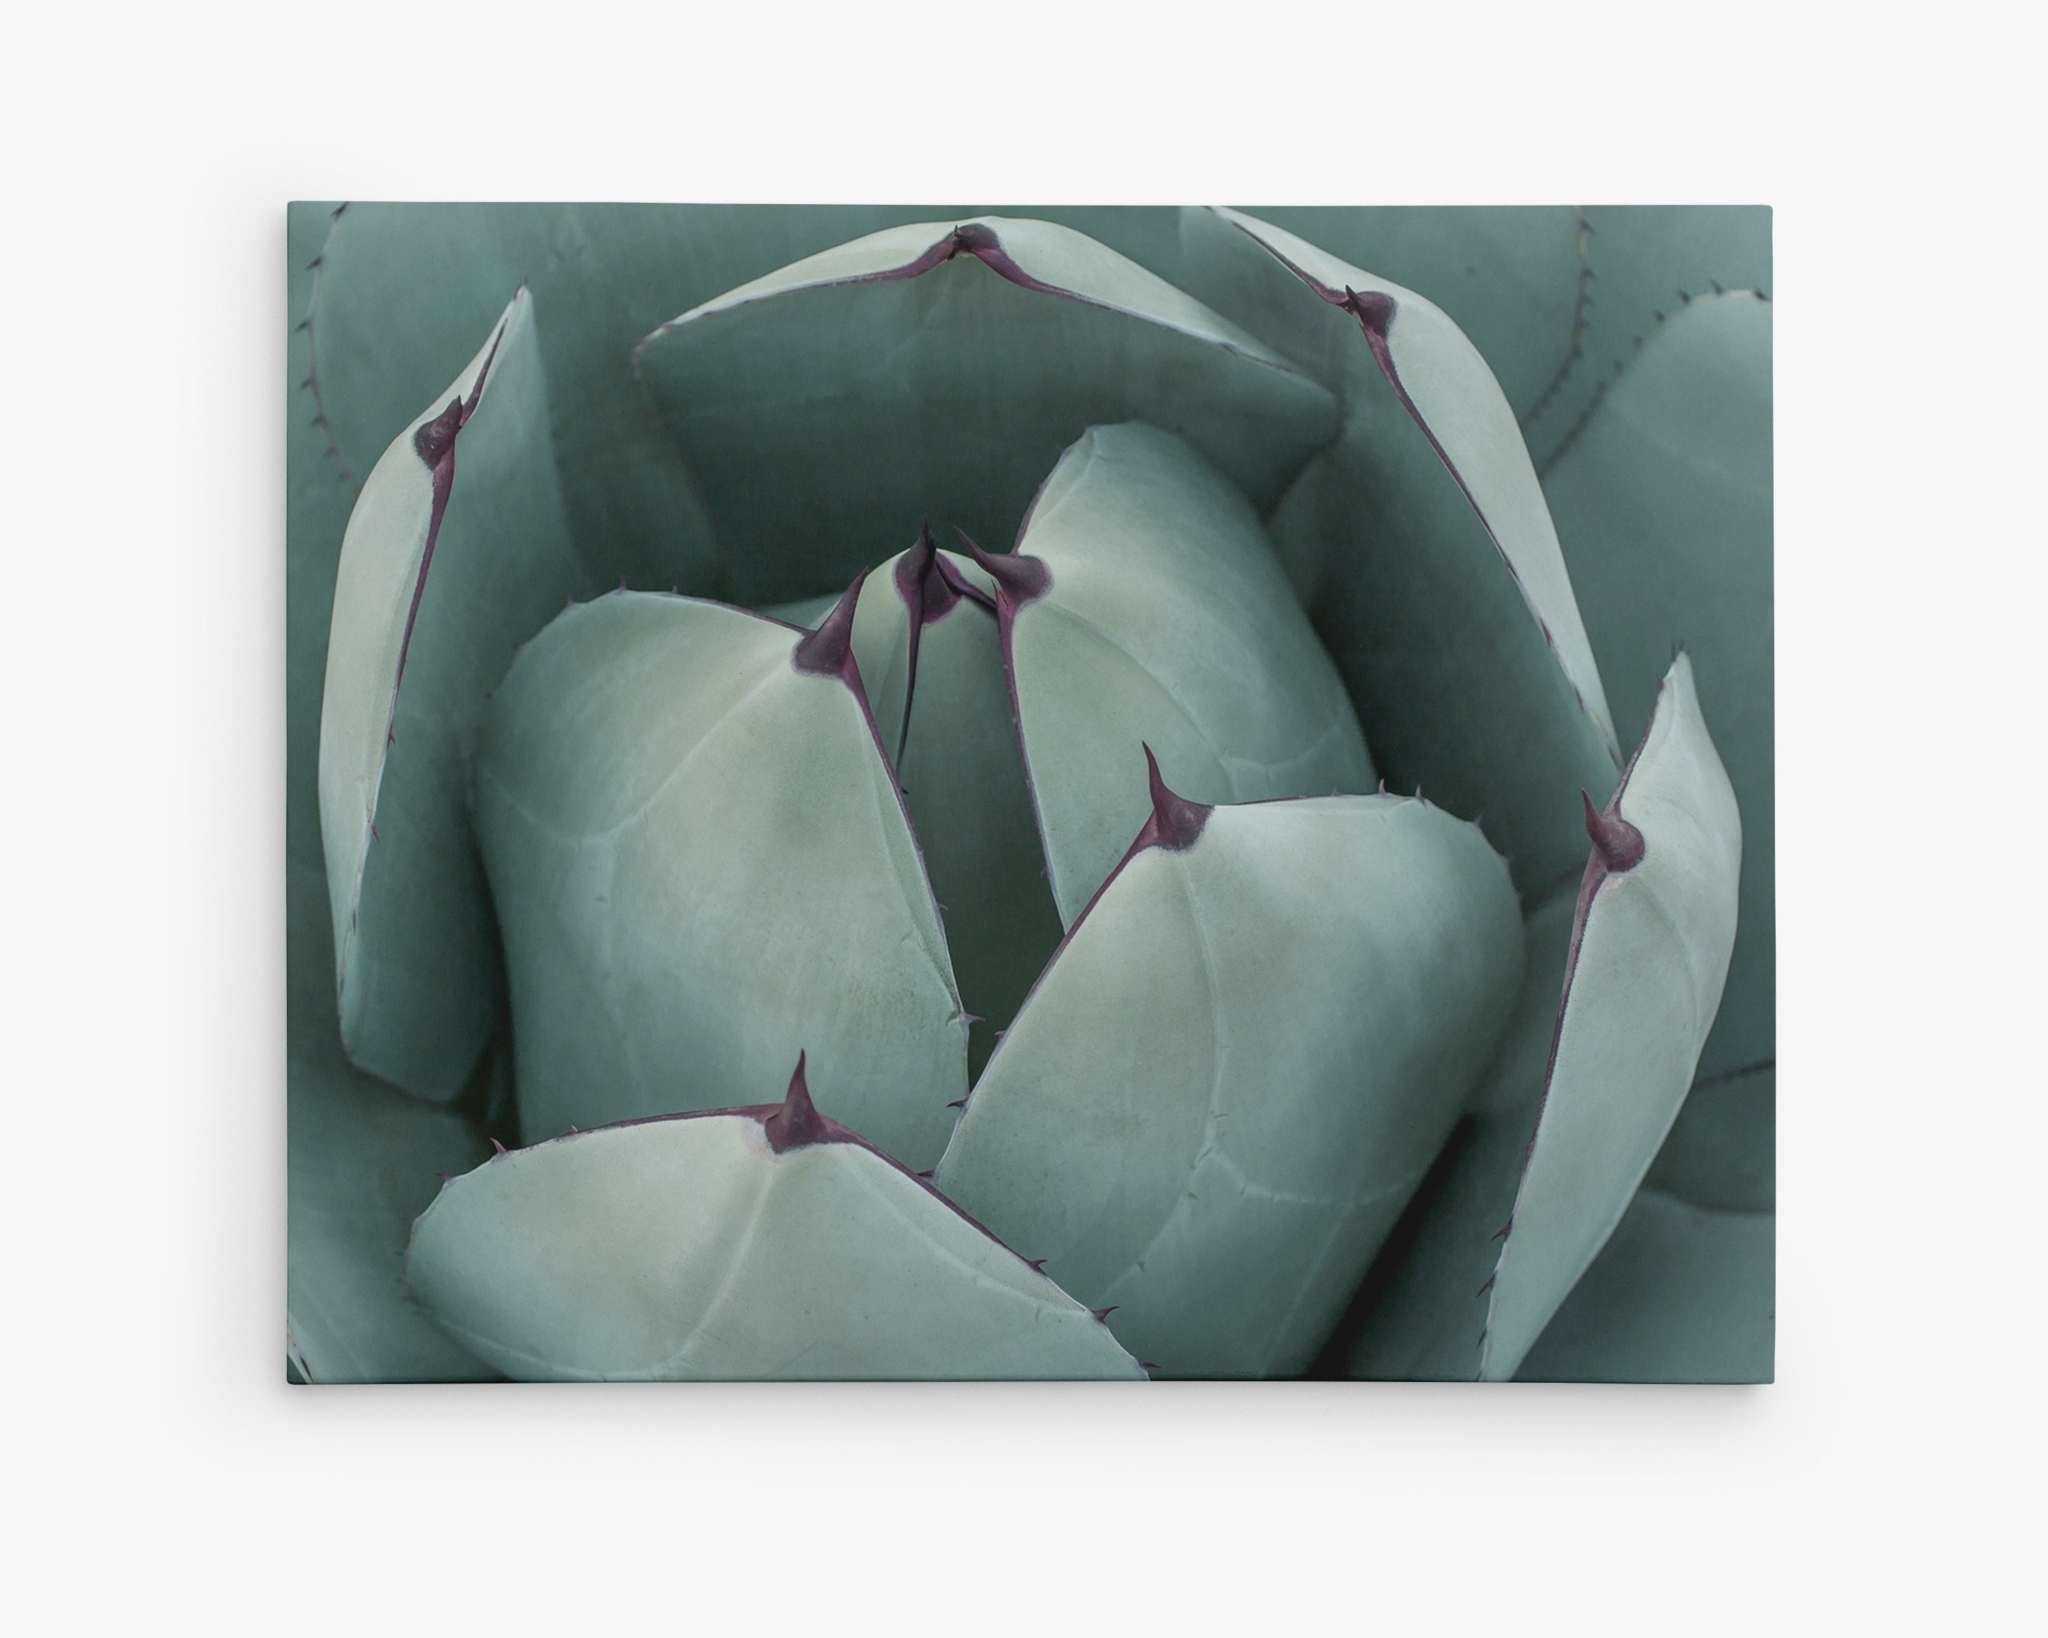 Close-up view of Offley Green's Abstract Teal Green Botanical Wall Art, 'Teal Petals', depicting a succulent plant with thick, fleshy, pale green leaves that have pointed, burgundy-tinged tips. The leaves are tightly clustered together, creating a layered, rosette pattern. The background is out of focus, highlighting the central part of the desert plant.